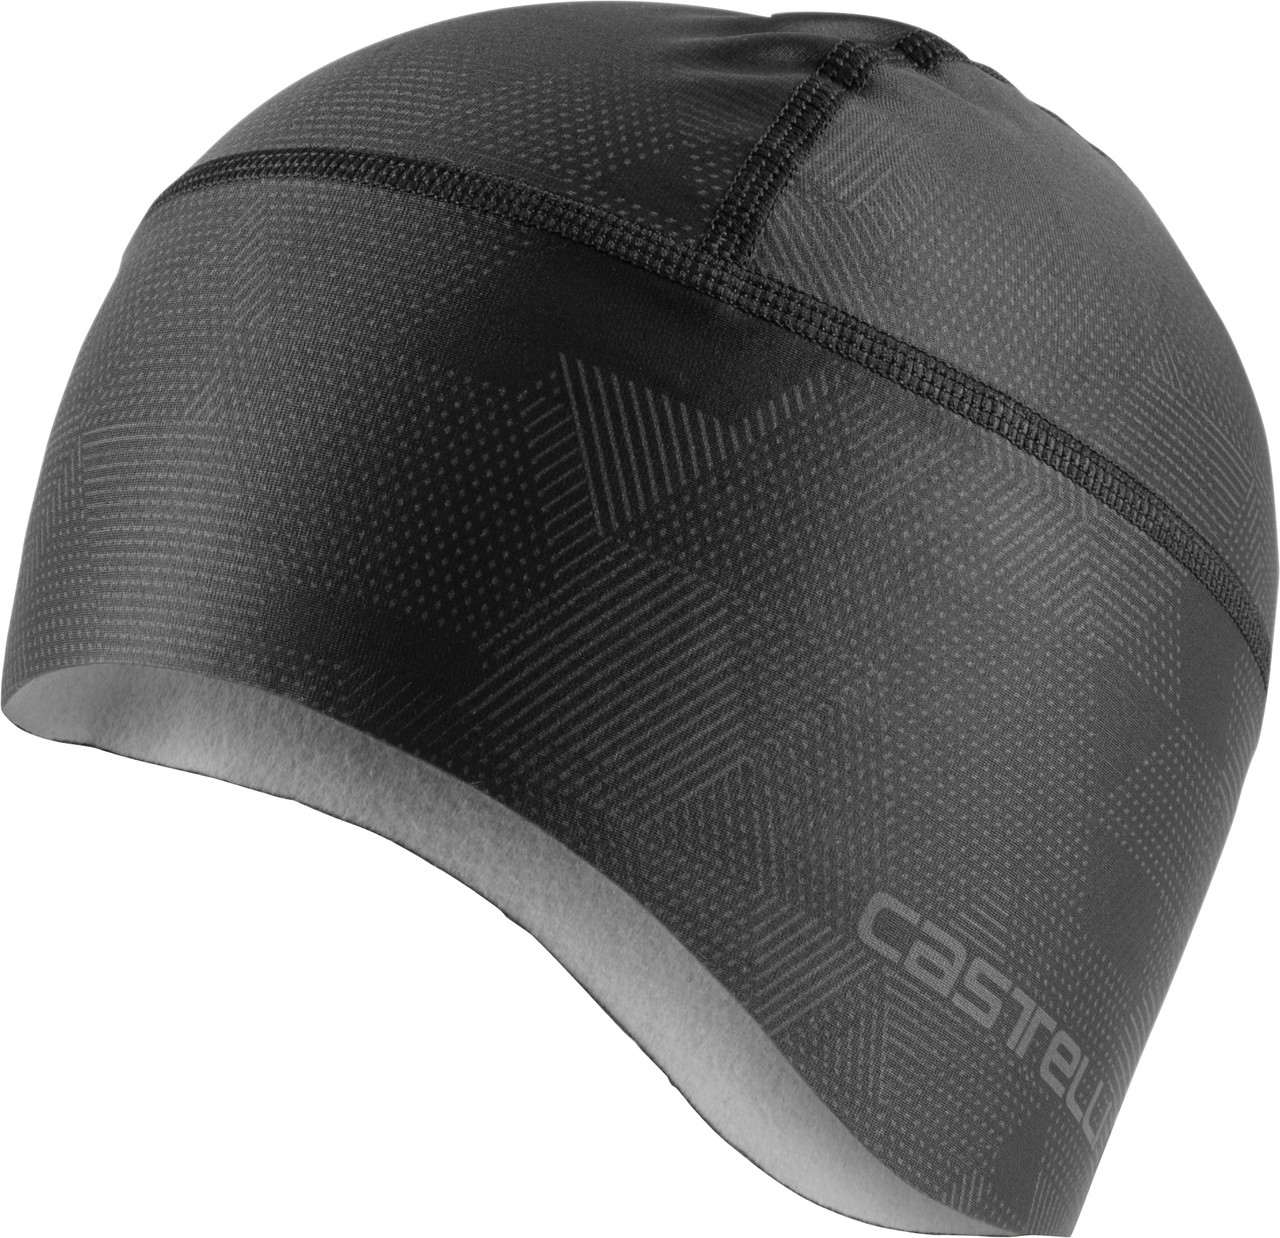 Tuque Pro Thermal Light Black